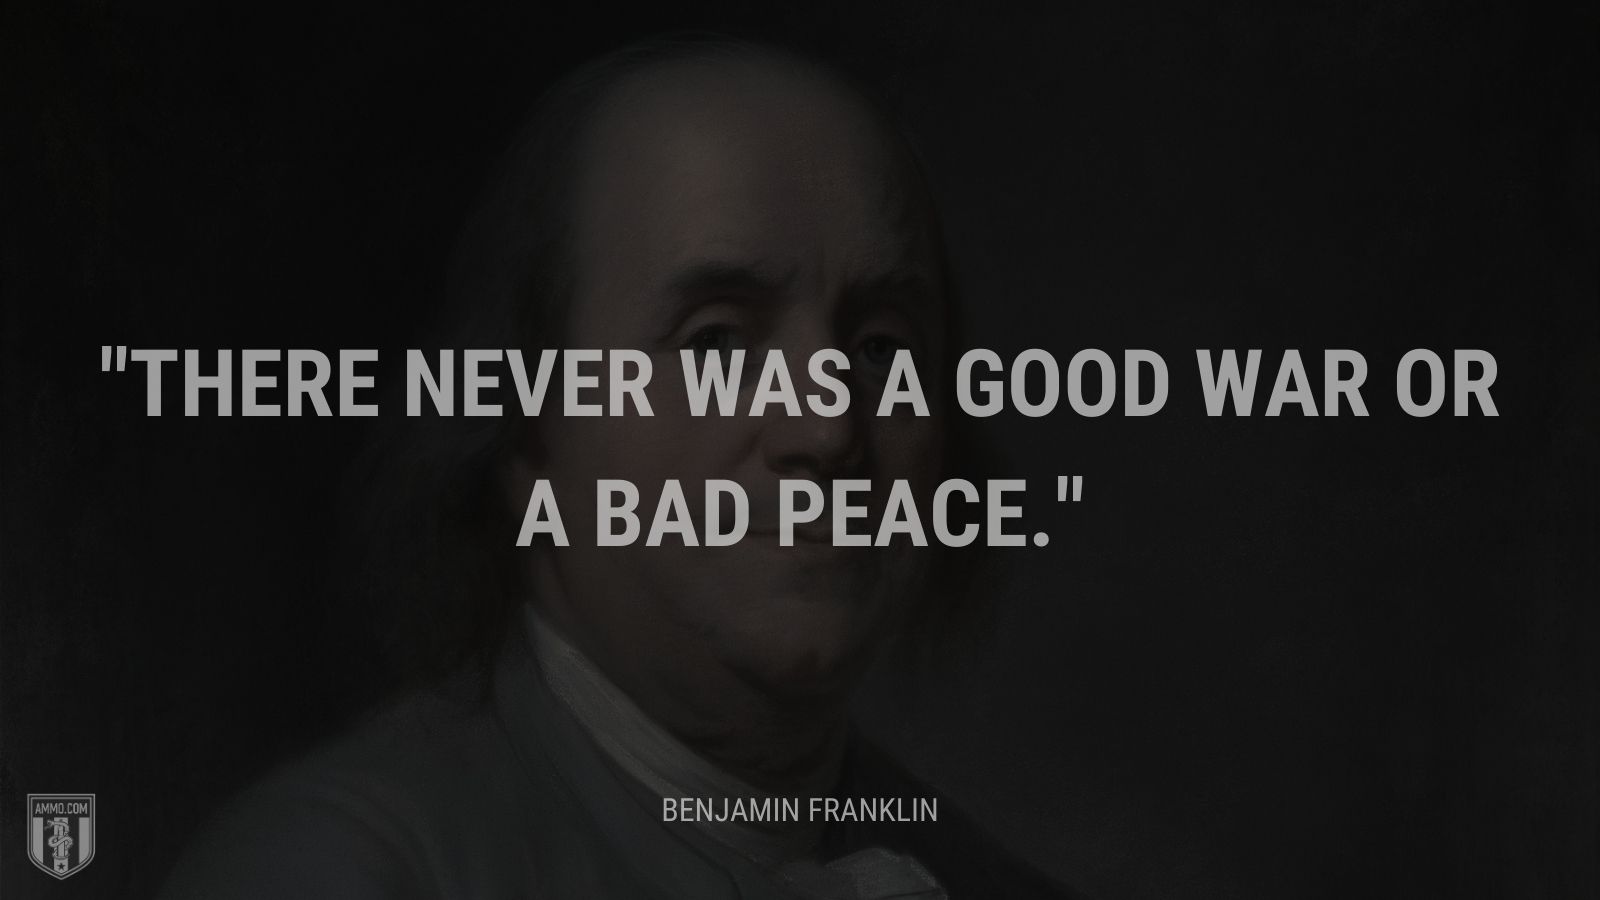 “There never was a good war or a bad peace.” - Benjamin Franklin